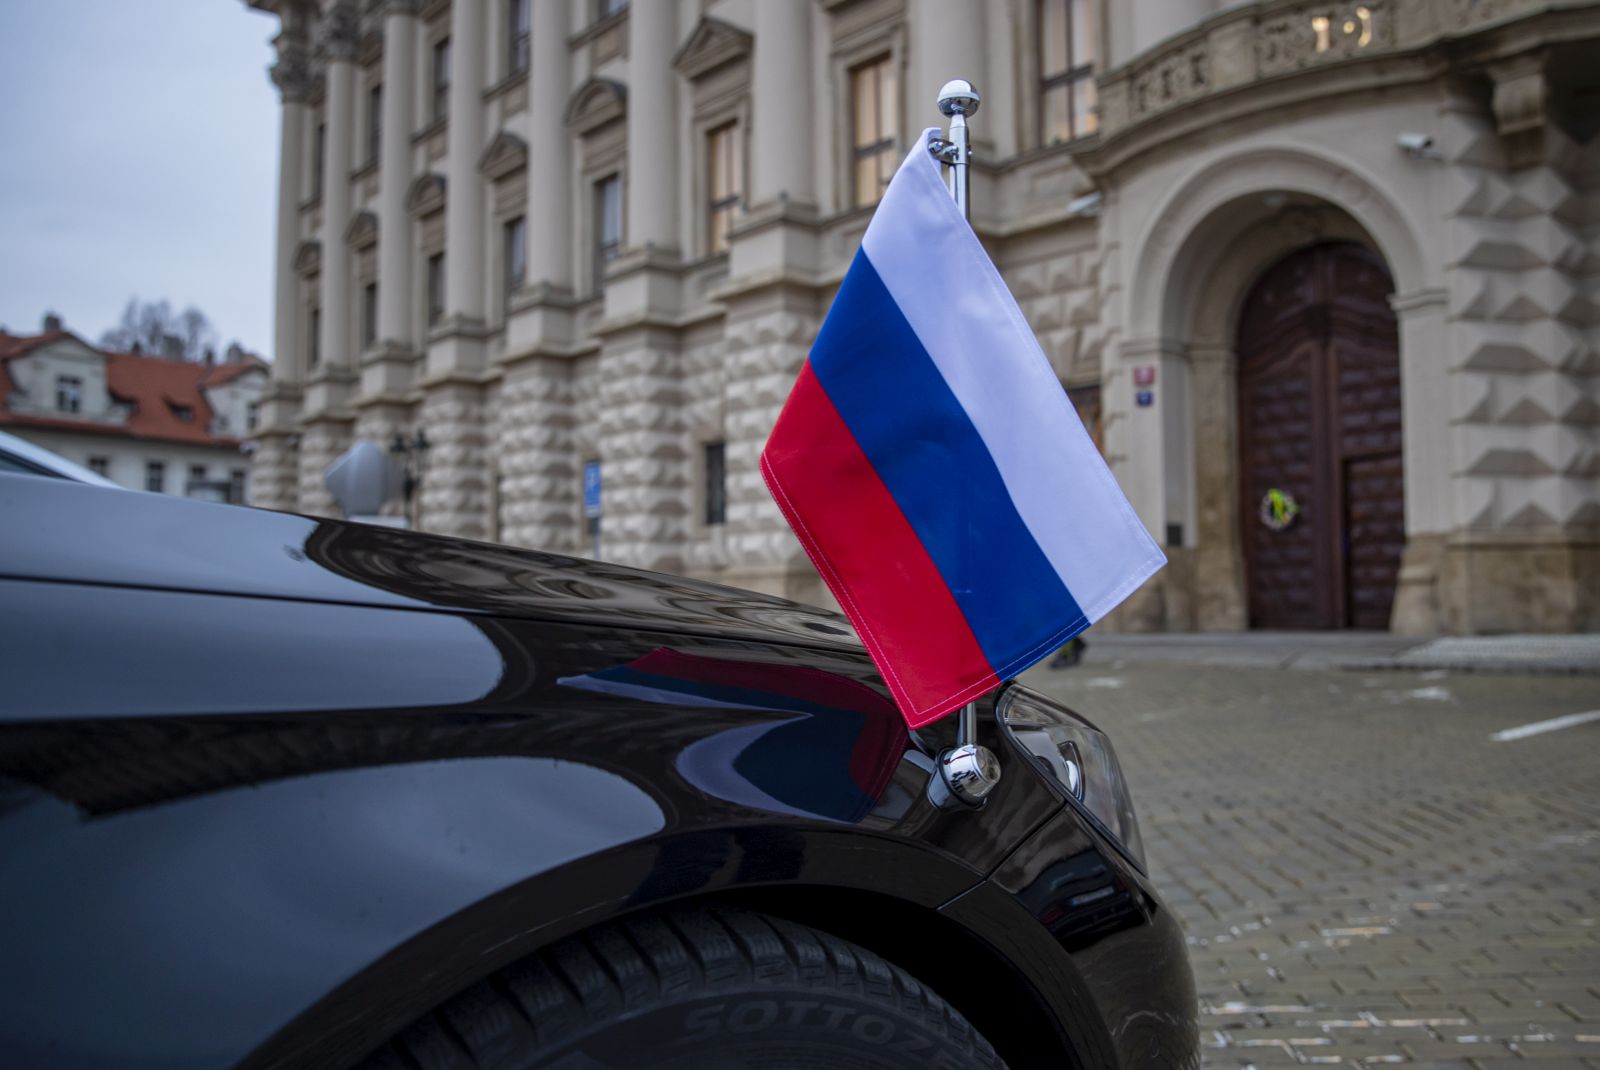 epa09142042 A car of Russian ambassador to Czech Republic stand in front of Czech Foreign Ministry in Prague, Czech Republic, 17 April 2021. According to the findings of the Czech security forces, there is reasonable suspicion that members of the Russian secret service GRU were involved in the explosion of the ammunition complex in Vrbetice in 2014, said Prime Minister Babis. Foreign Minister Jan Hamacek expelled all diplomats who were identified as members of the Russian secret services GRU and SVR. In all 18 people. They have 48 hours to leave the Czech Republic.  EPA/MARTIN DIVISEK